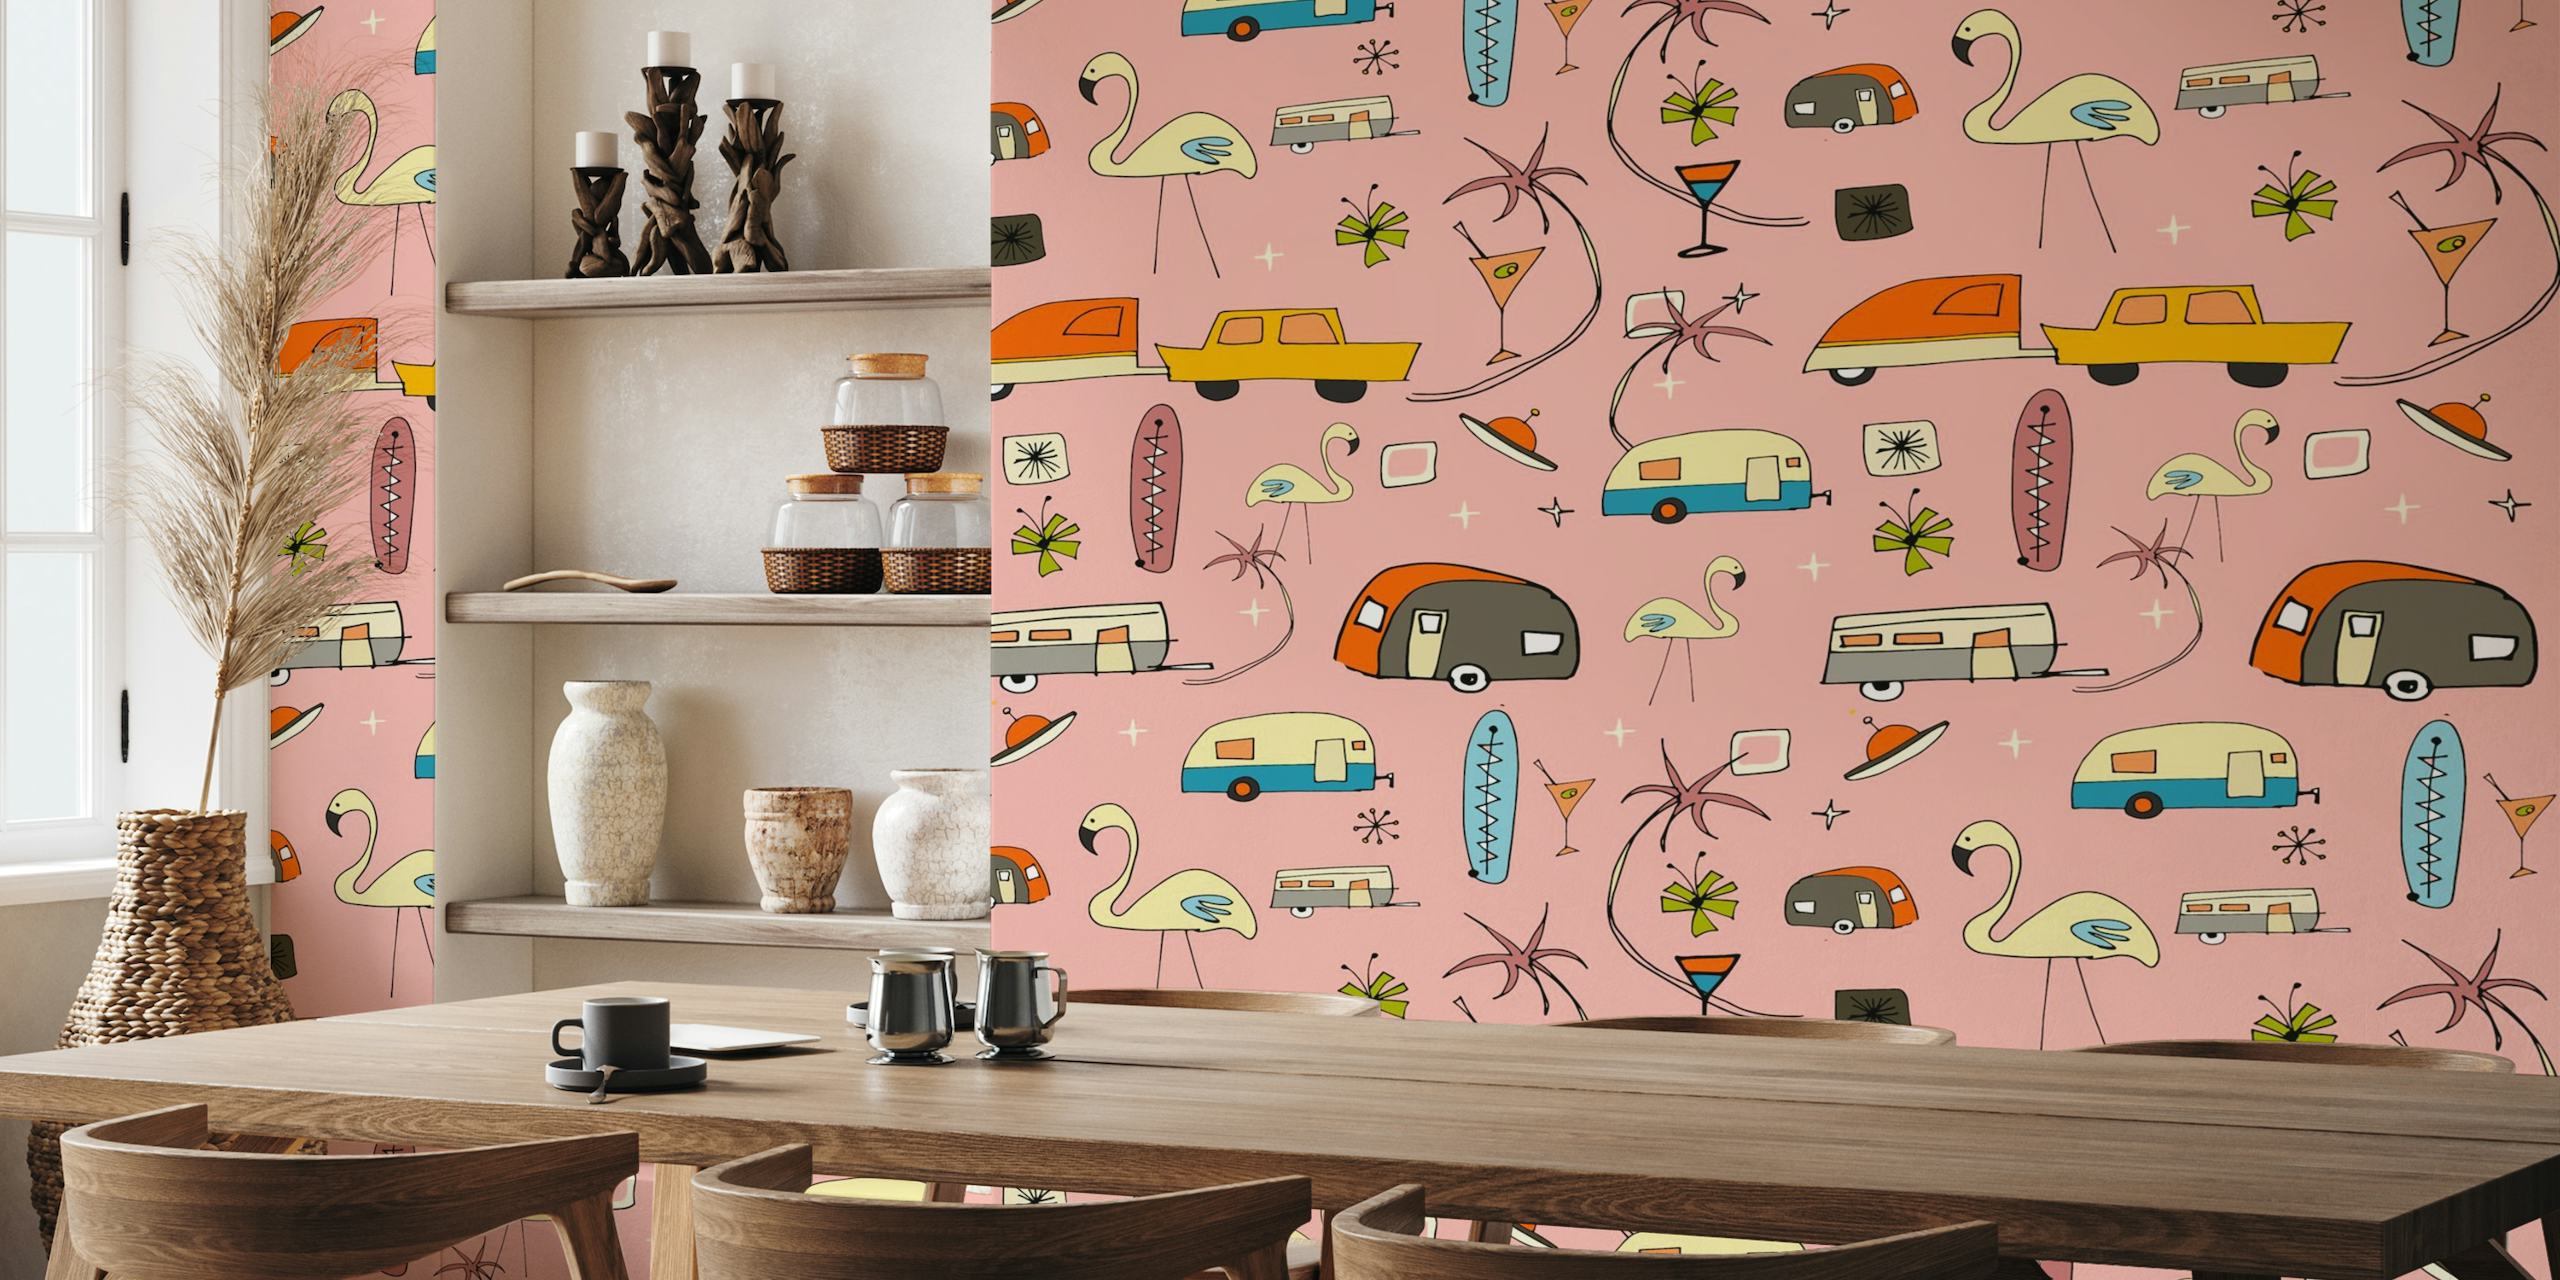 Vintage-inspired wall mural with pink background, flamingos, trailers, and palm trees